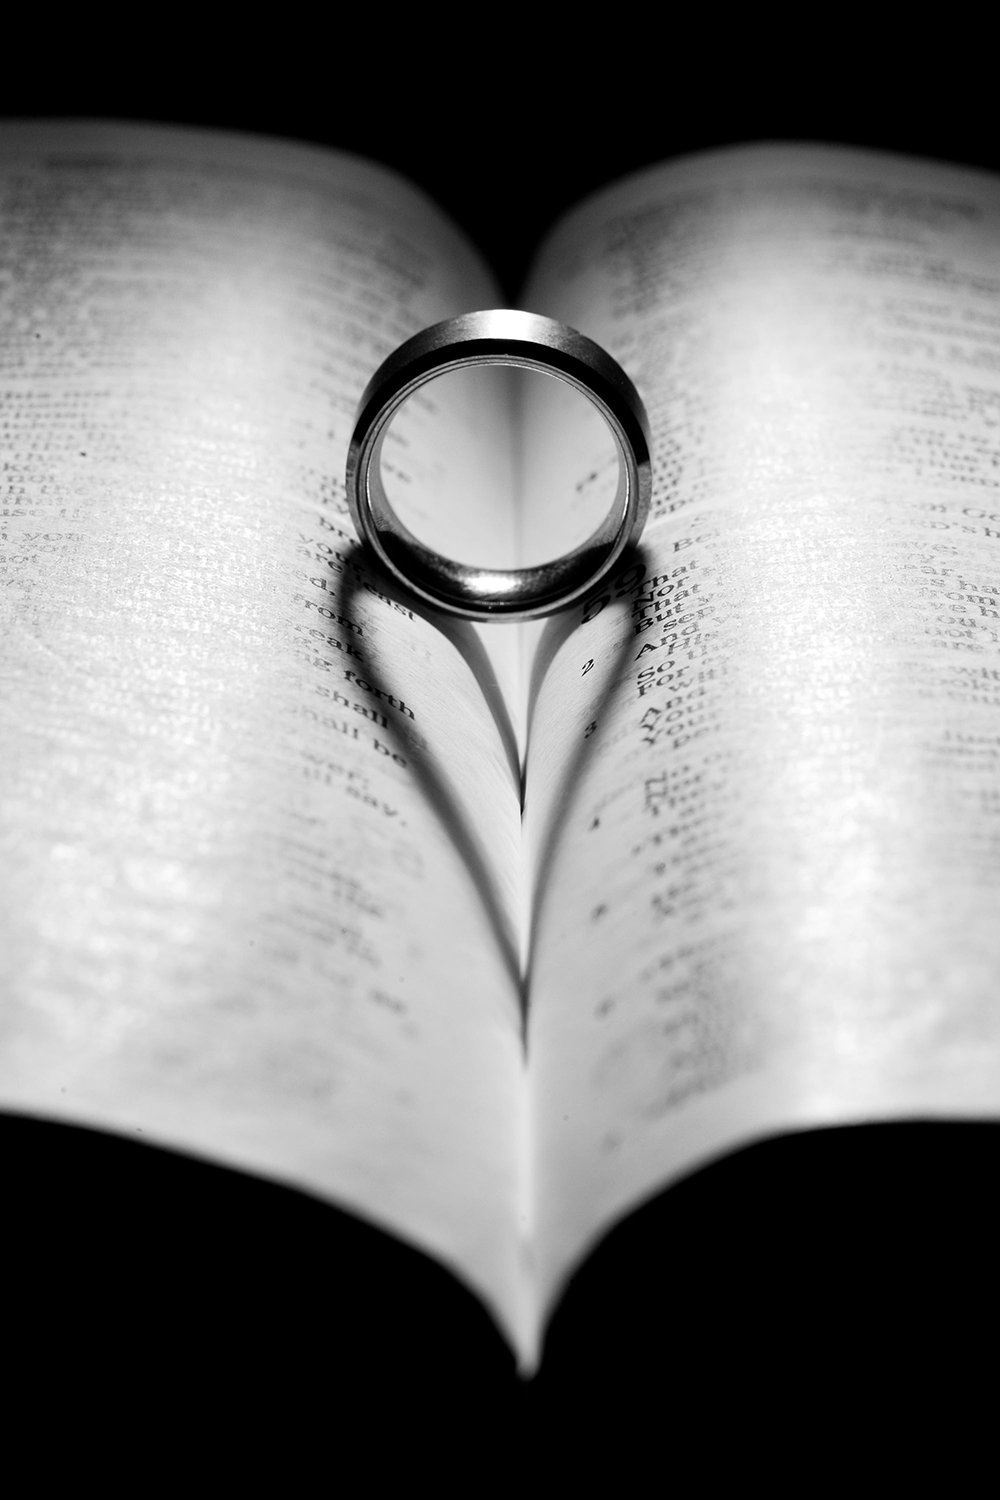 wedding photos rings making heart shape with shadow